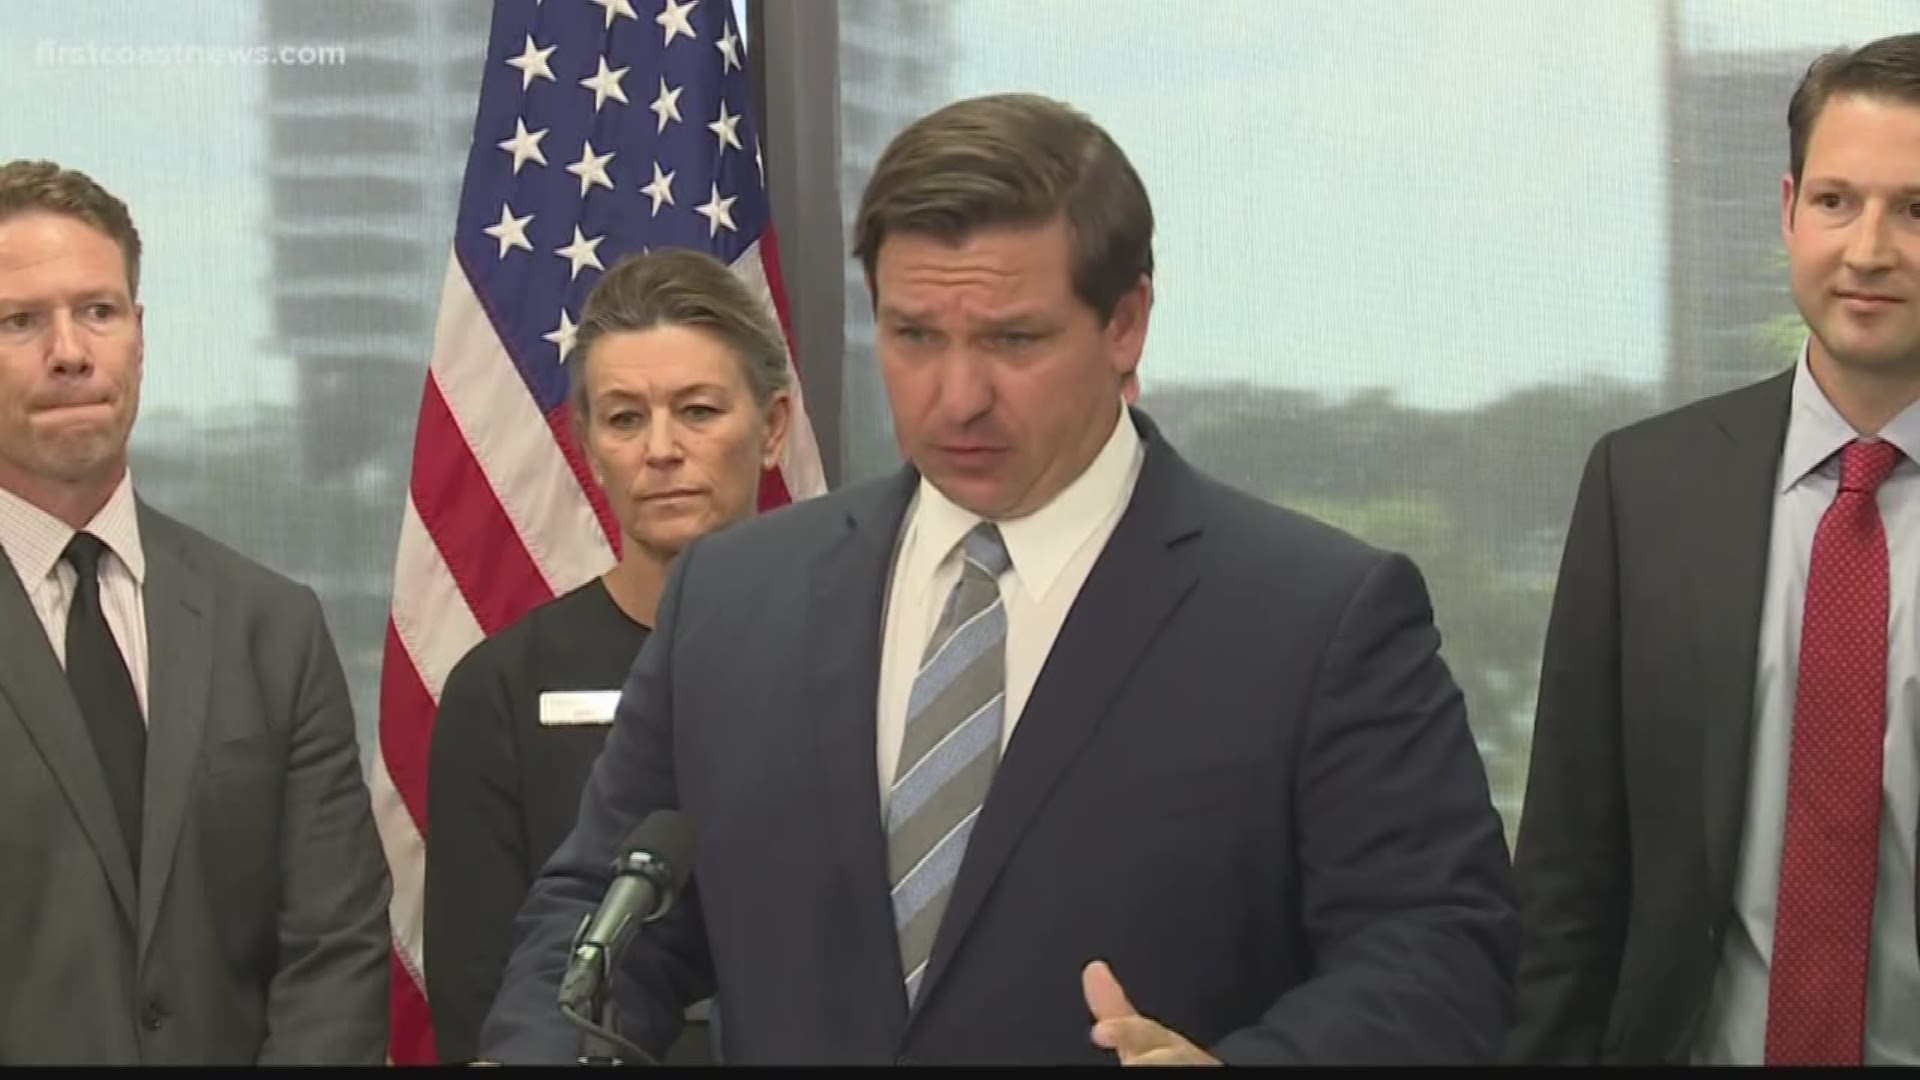 DeSantis hopes that these new initiatives will fill jobs and lead to growth in workforce development in both Jacksonville and beyond.